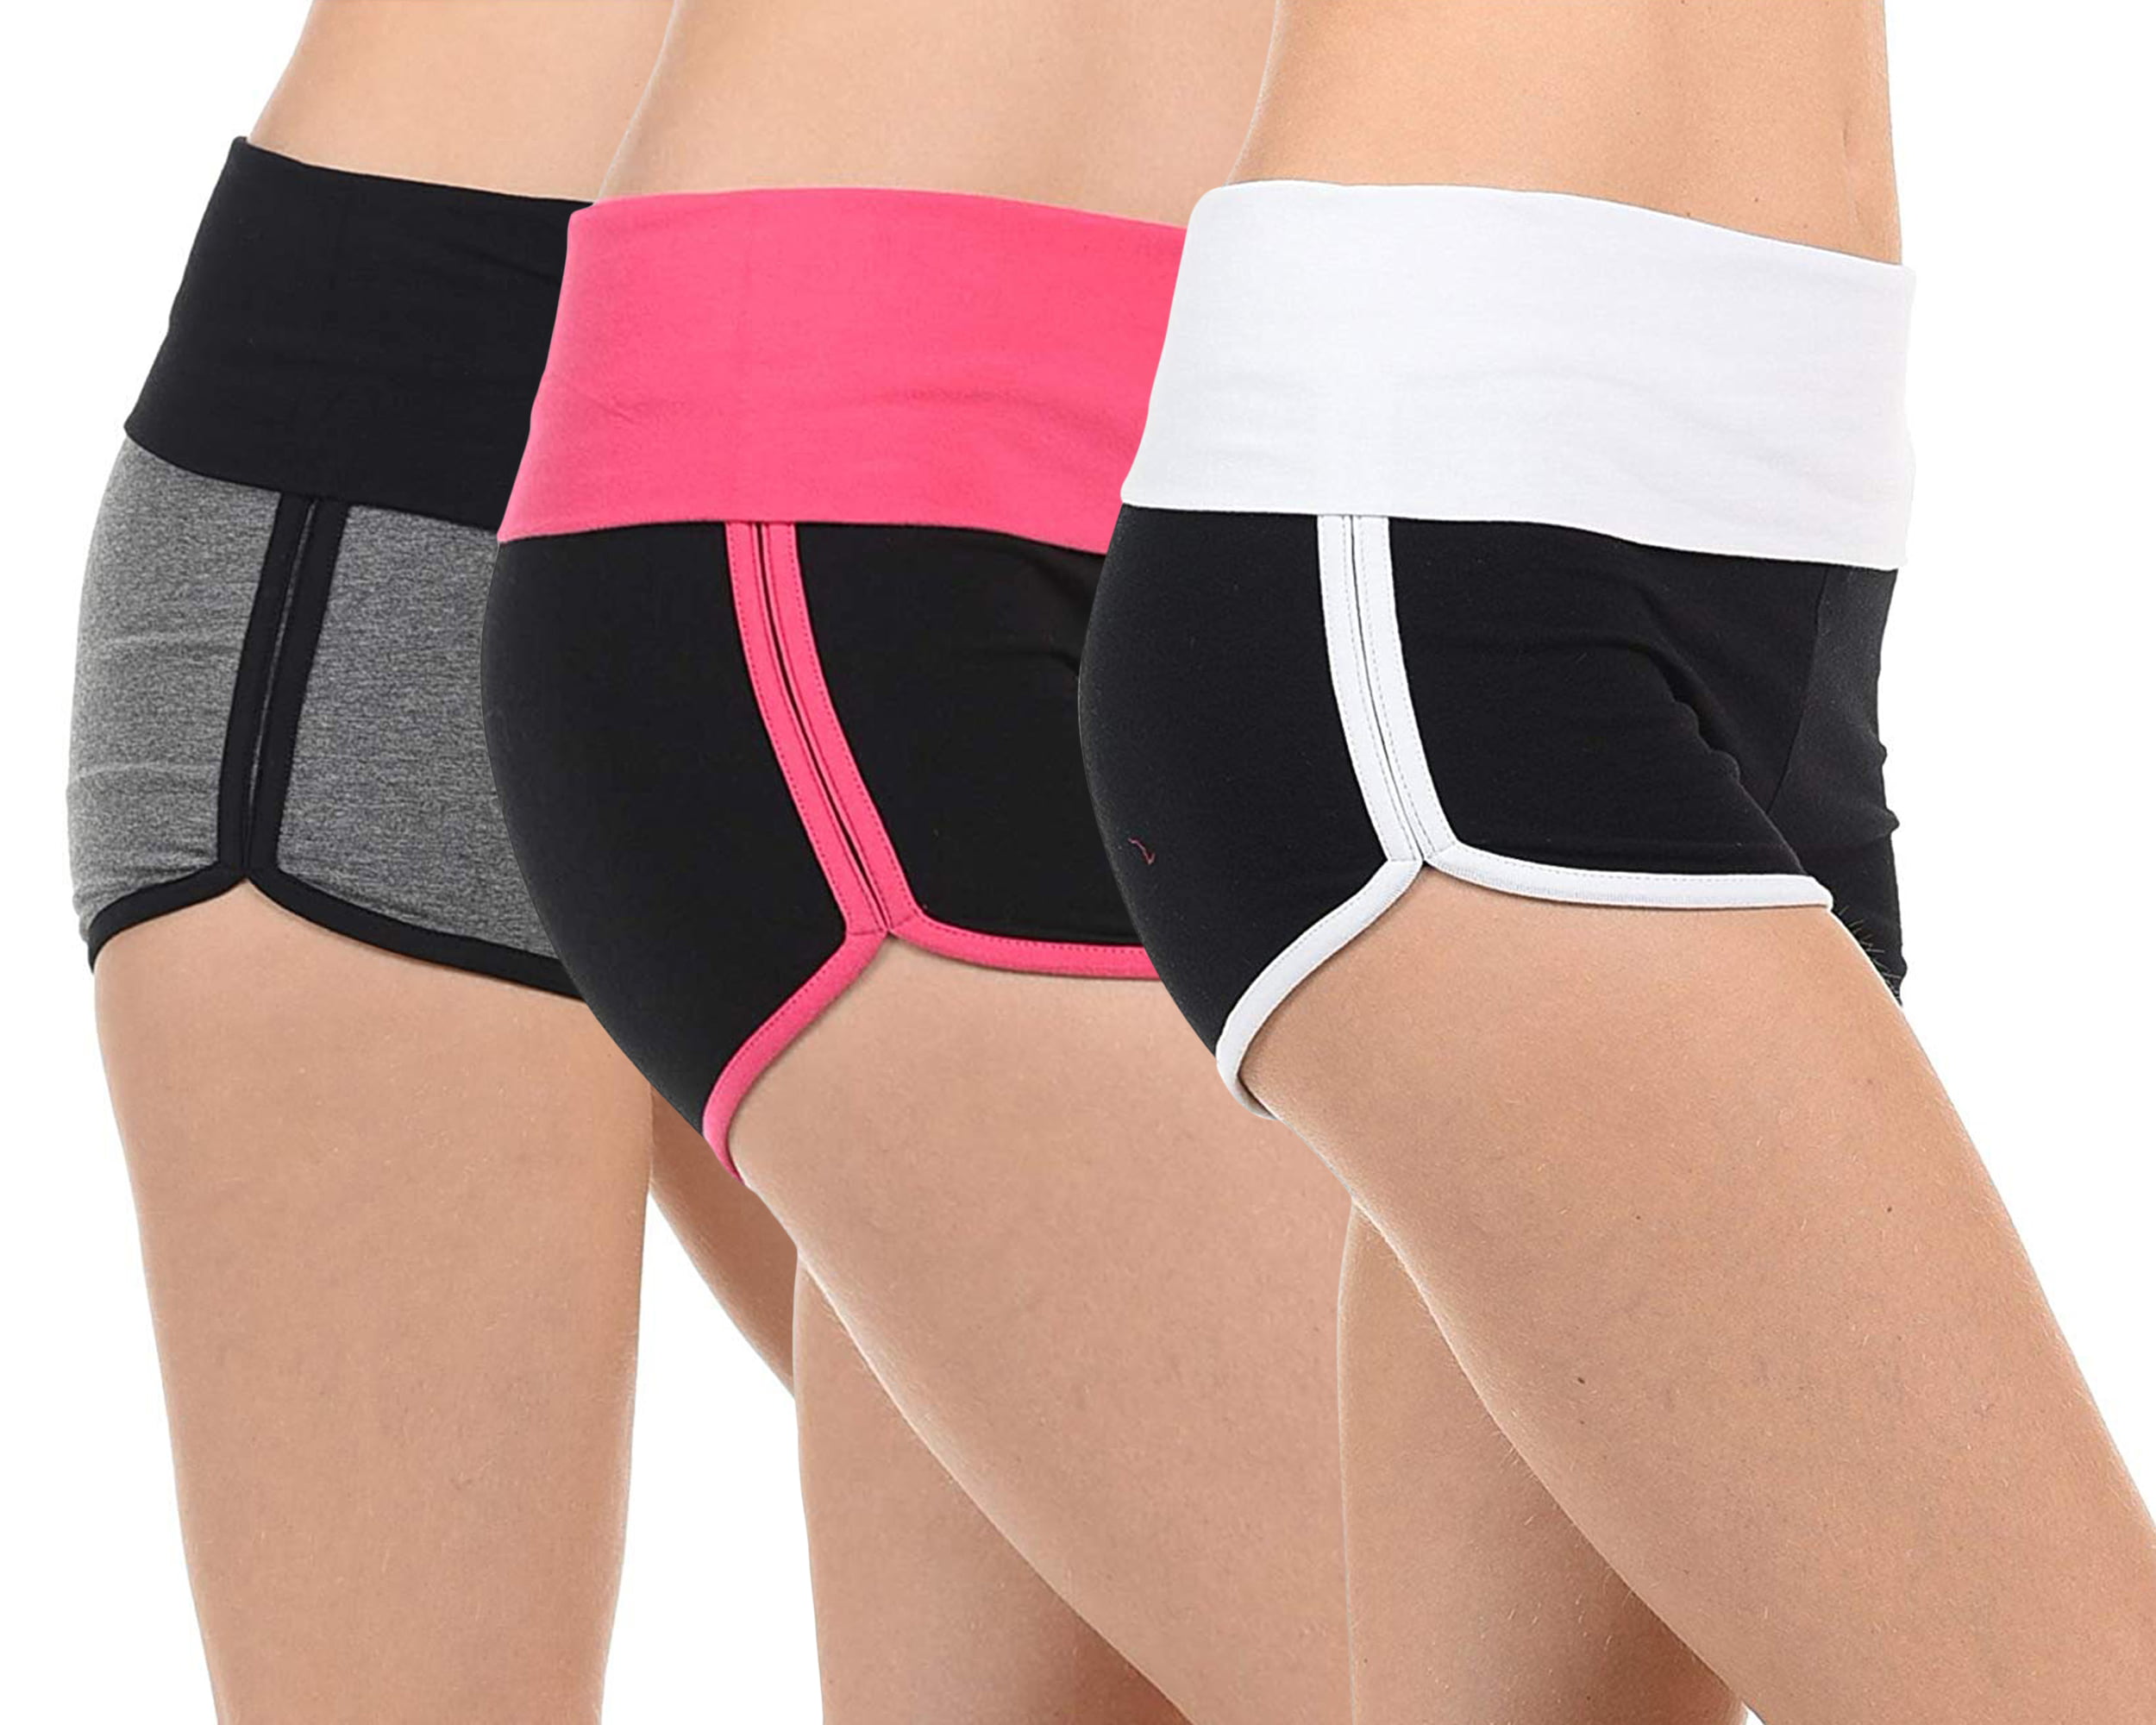 Mid Rise Dolphin Cut Premium Stretch Running Shorts for Juniors Women Many Colors 